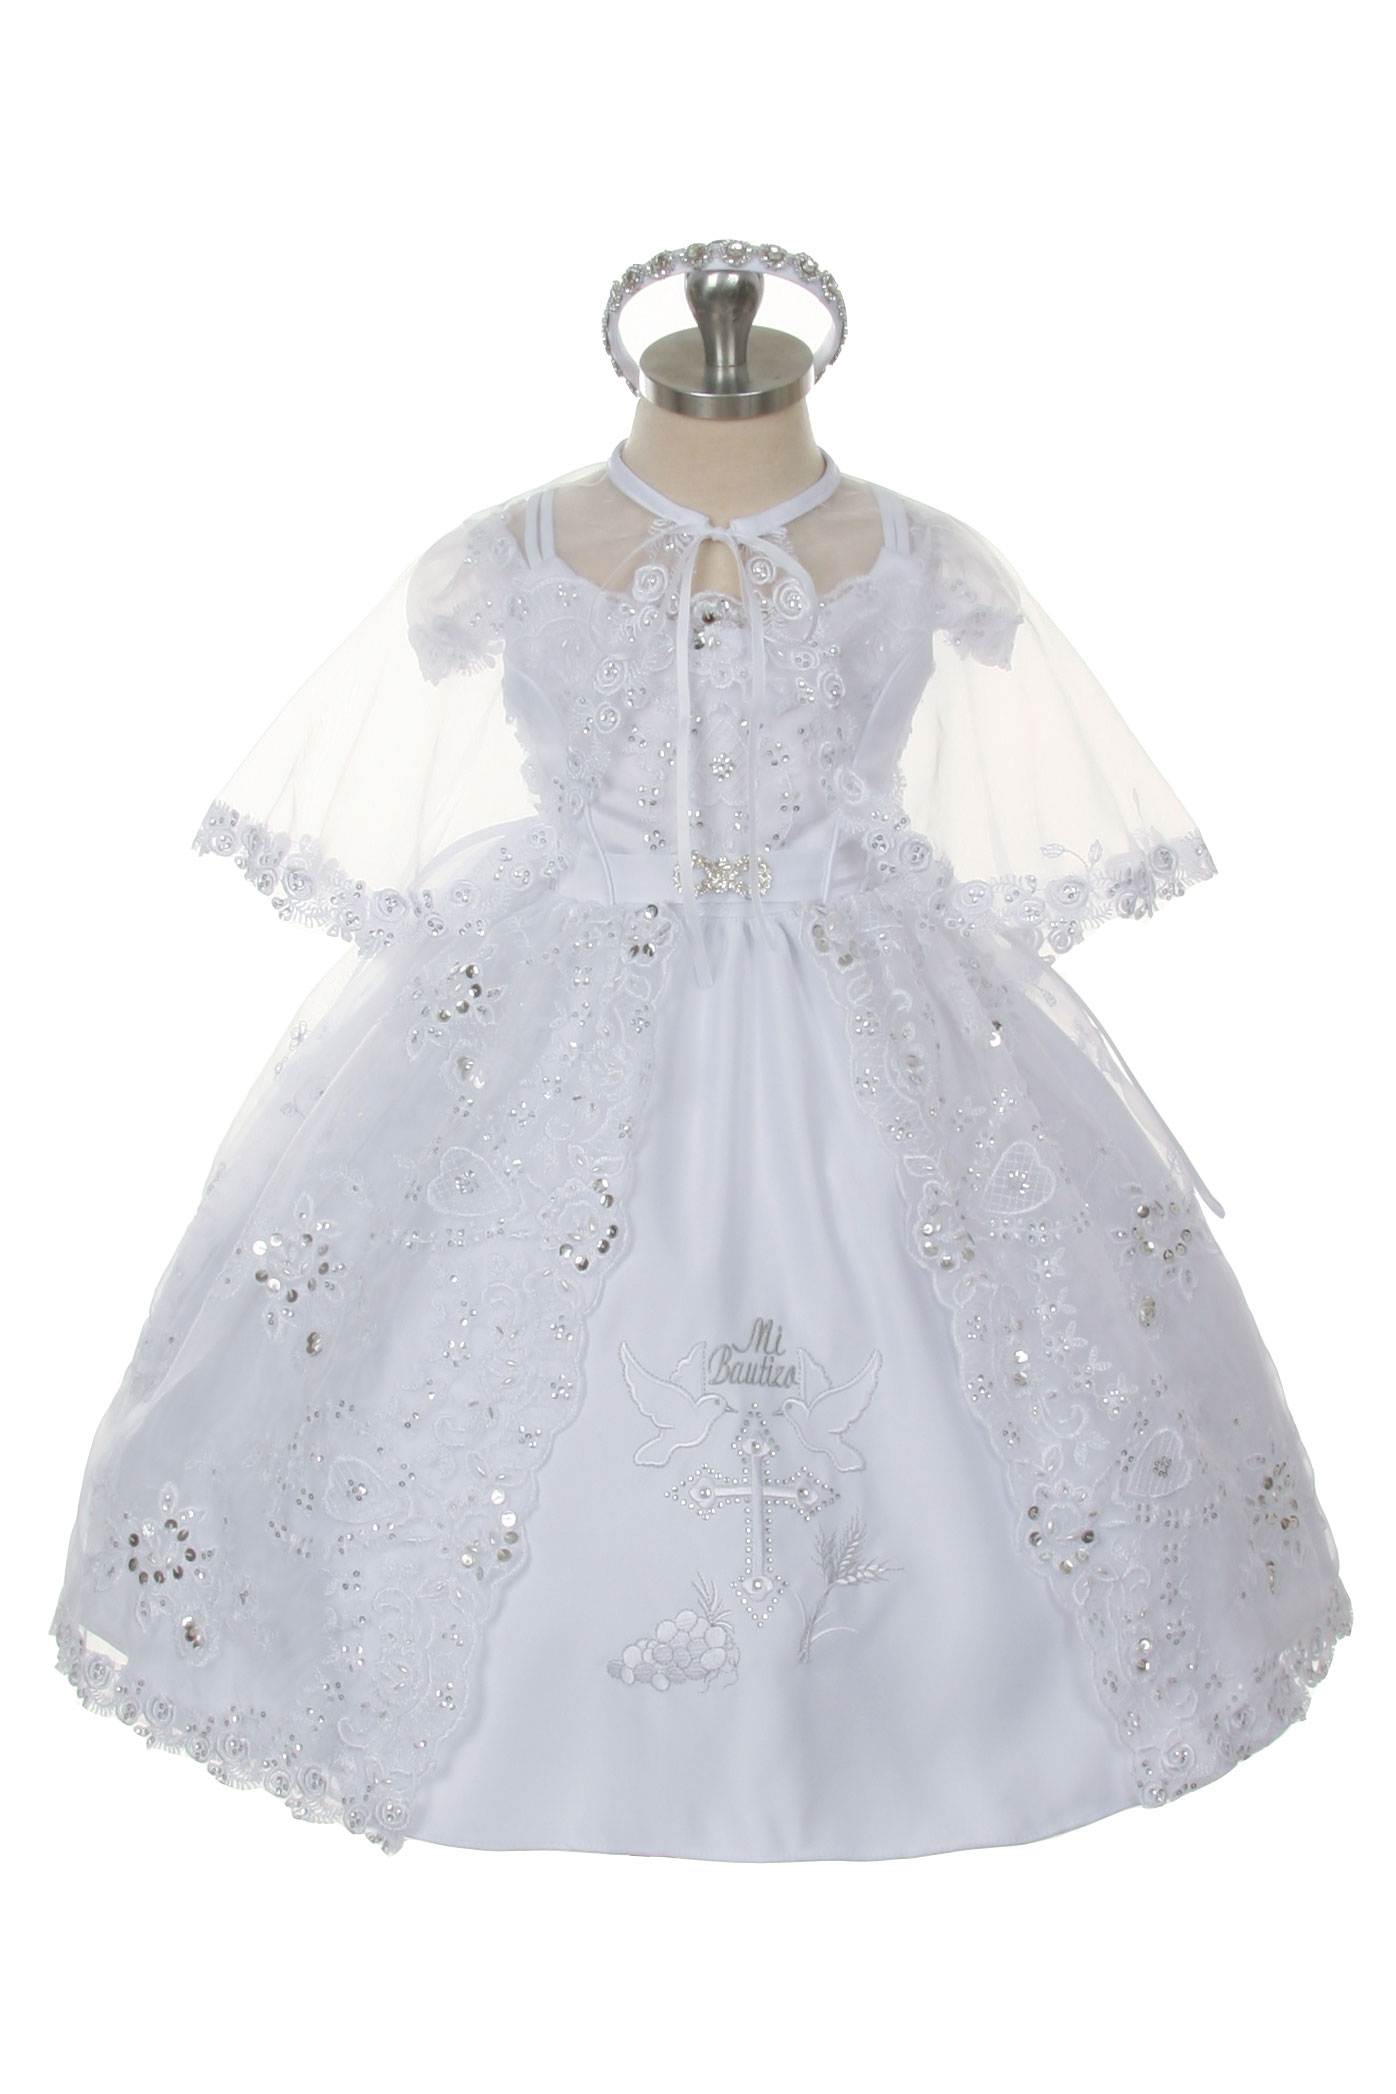 RK_399 - Girls Dress Style 399 - WHITE Baptism and Christening Outfit ...